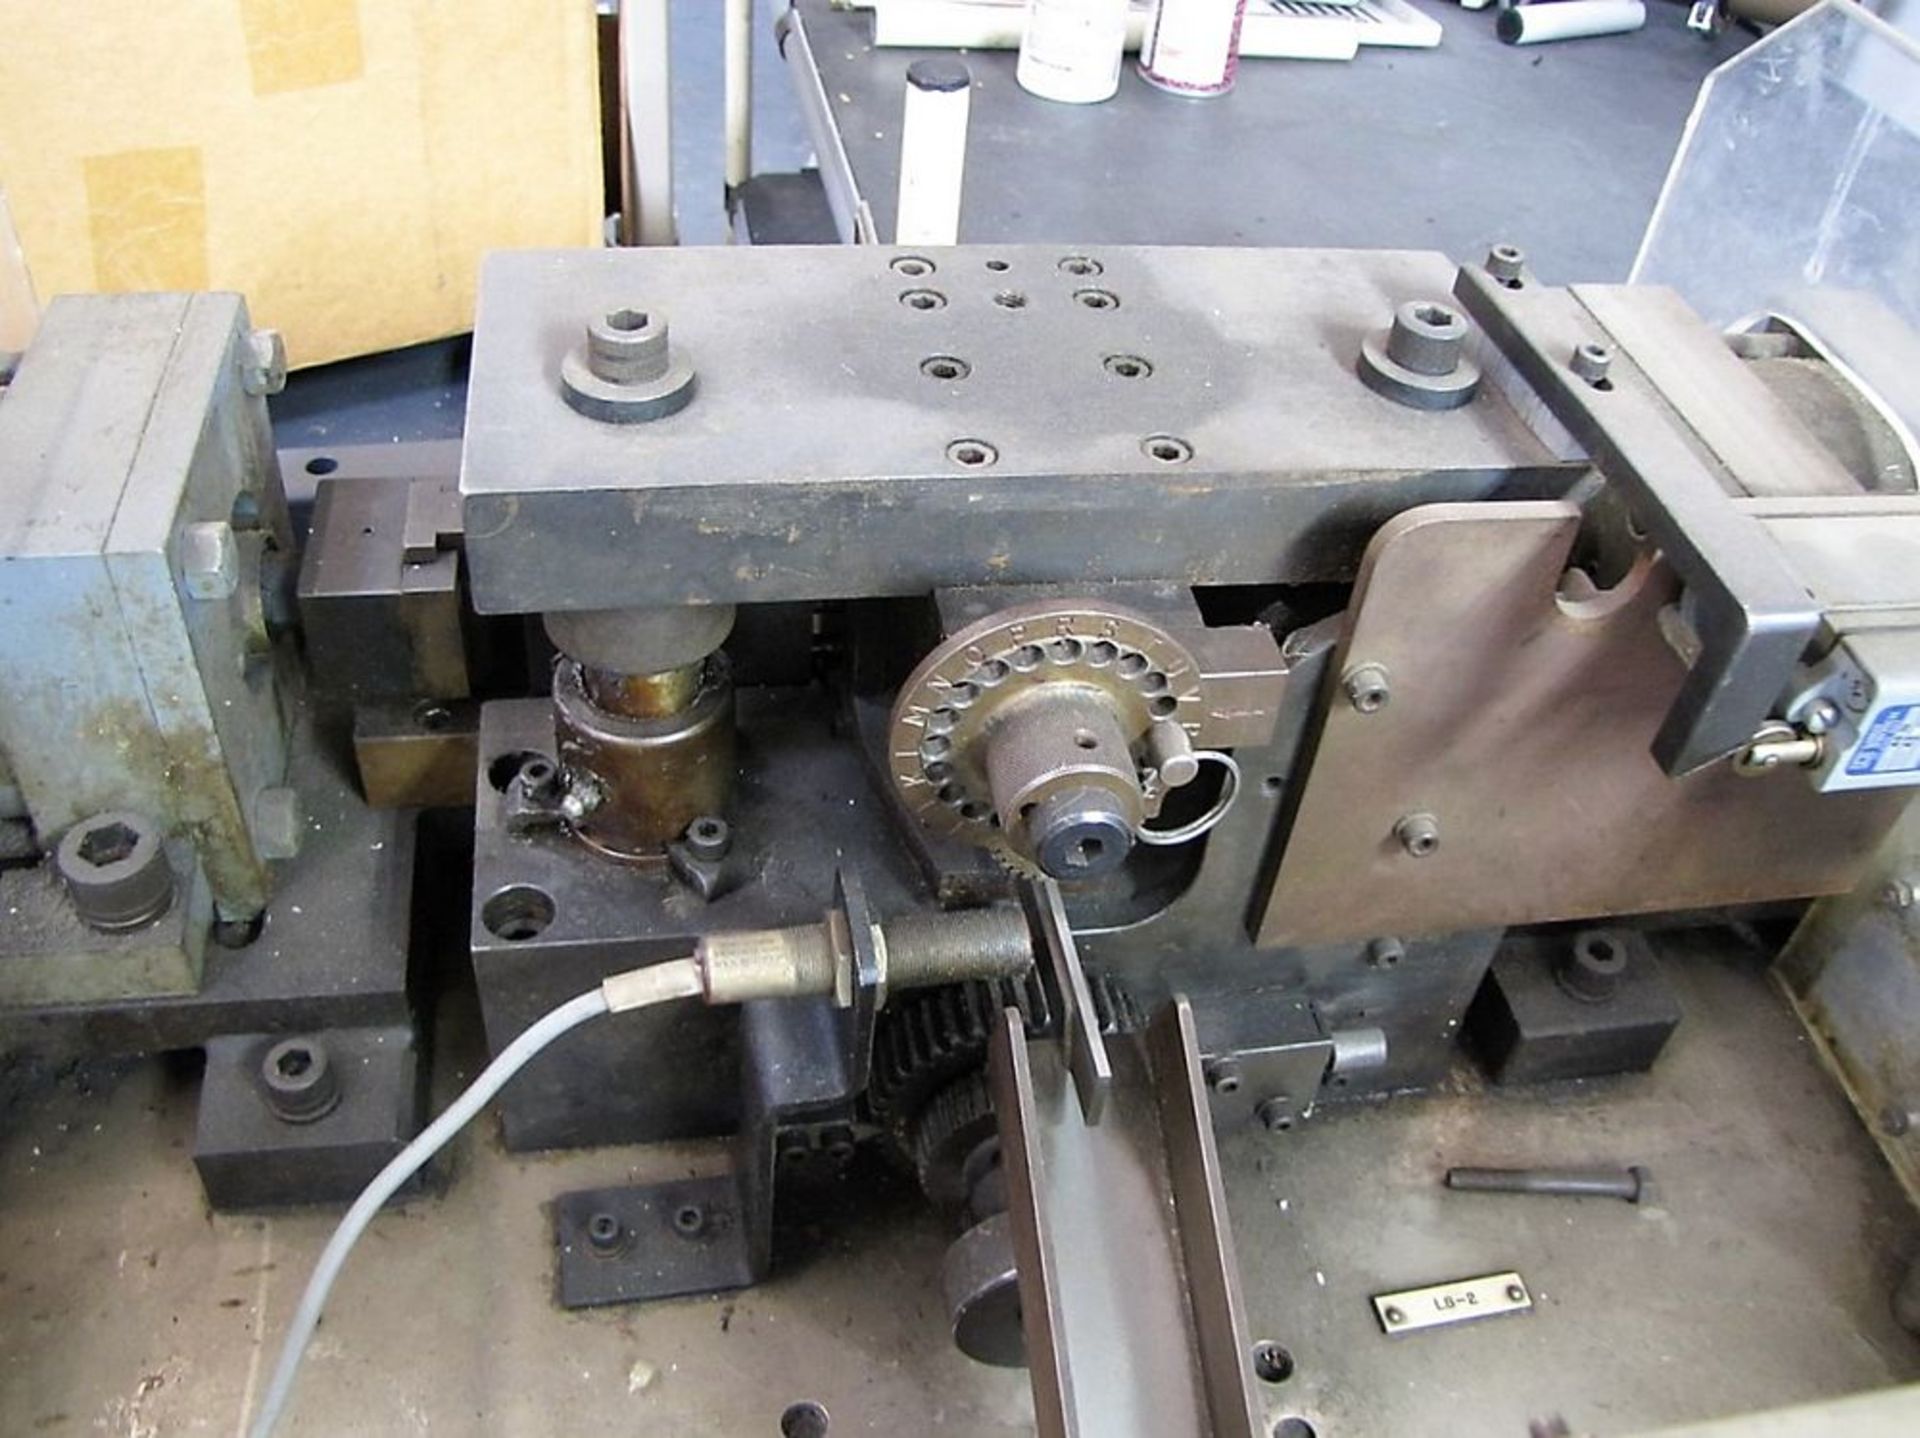 Alton Tool Perforate And Stamp Fixture Unit - Image 2 of 2